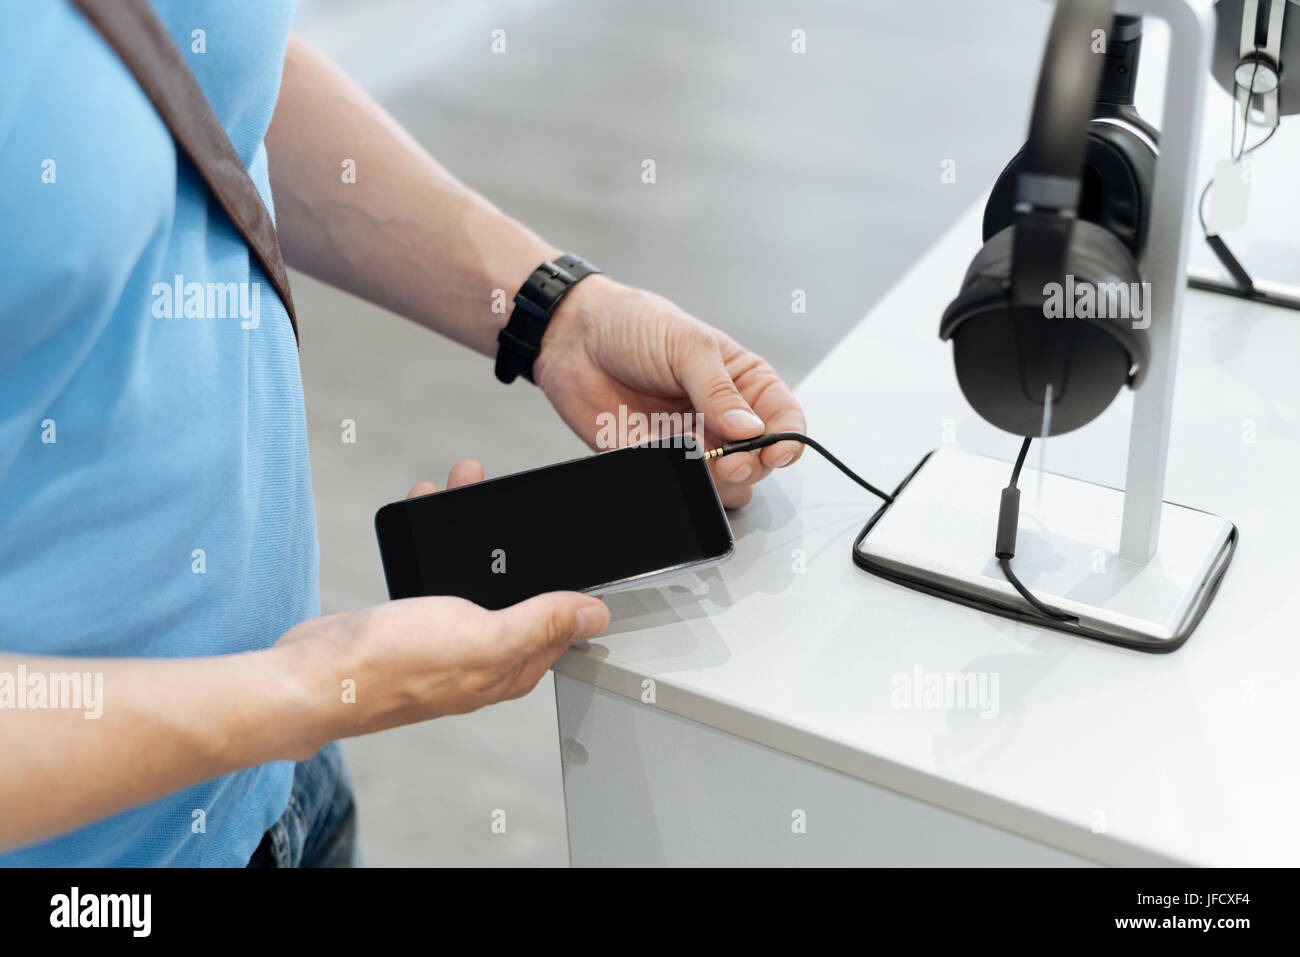 Let me try this out. Scaled up shot of a male customer trying to plug mockup headphones into his smartphone while standing at a display and shopping f Stock Photo